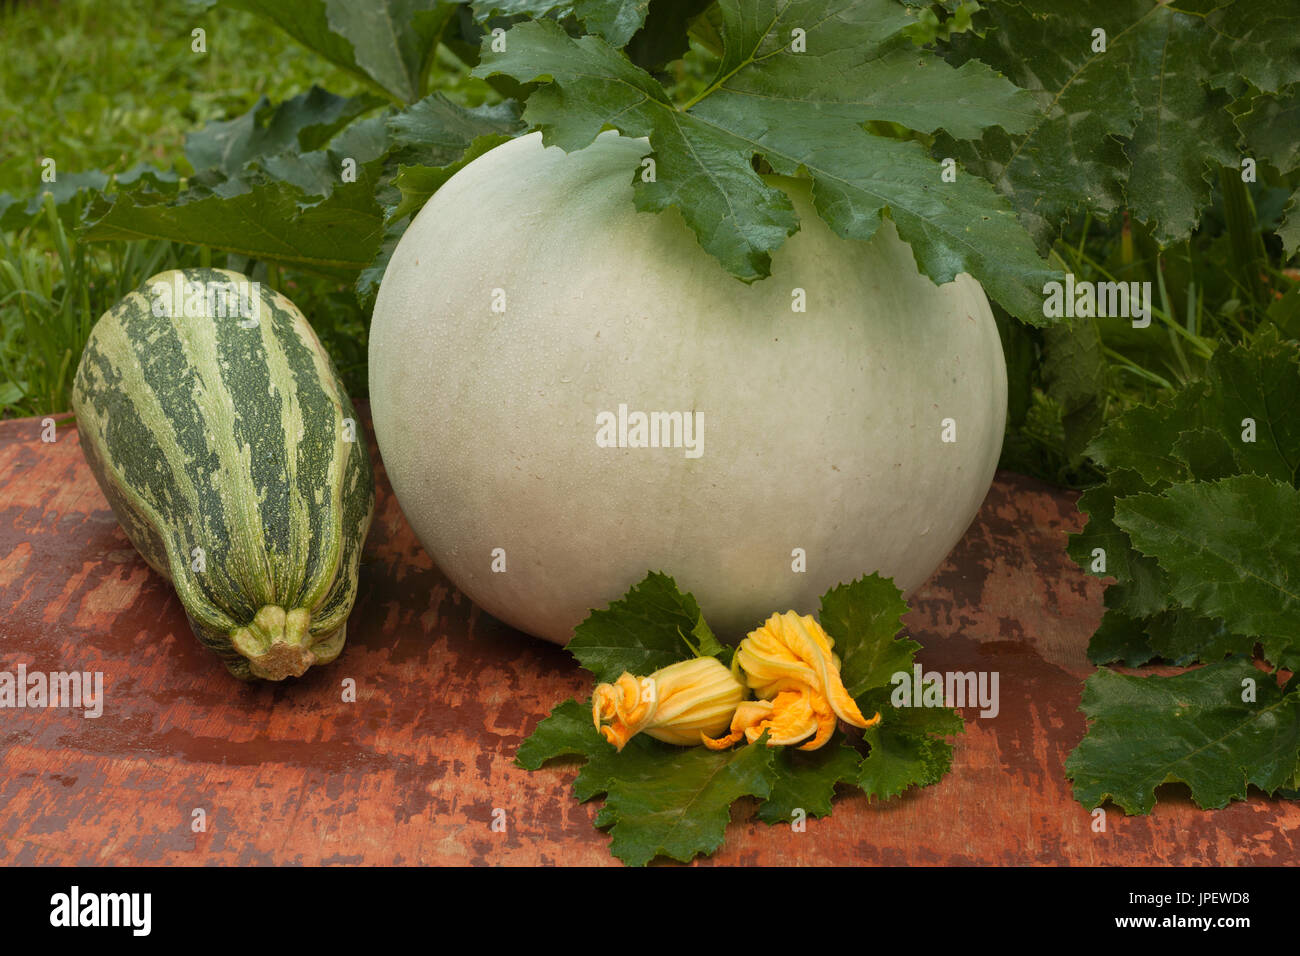 Organic Fresh  Vegetable Marrow And Pumpkin On Old Painted Wooden Table On Summer Vegetable Garden Close Up. Stock Photo